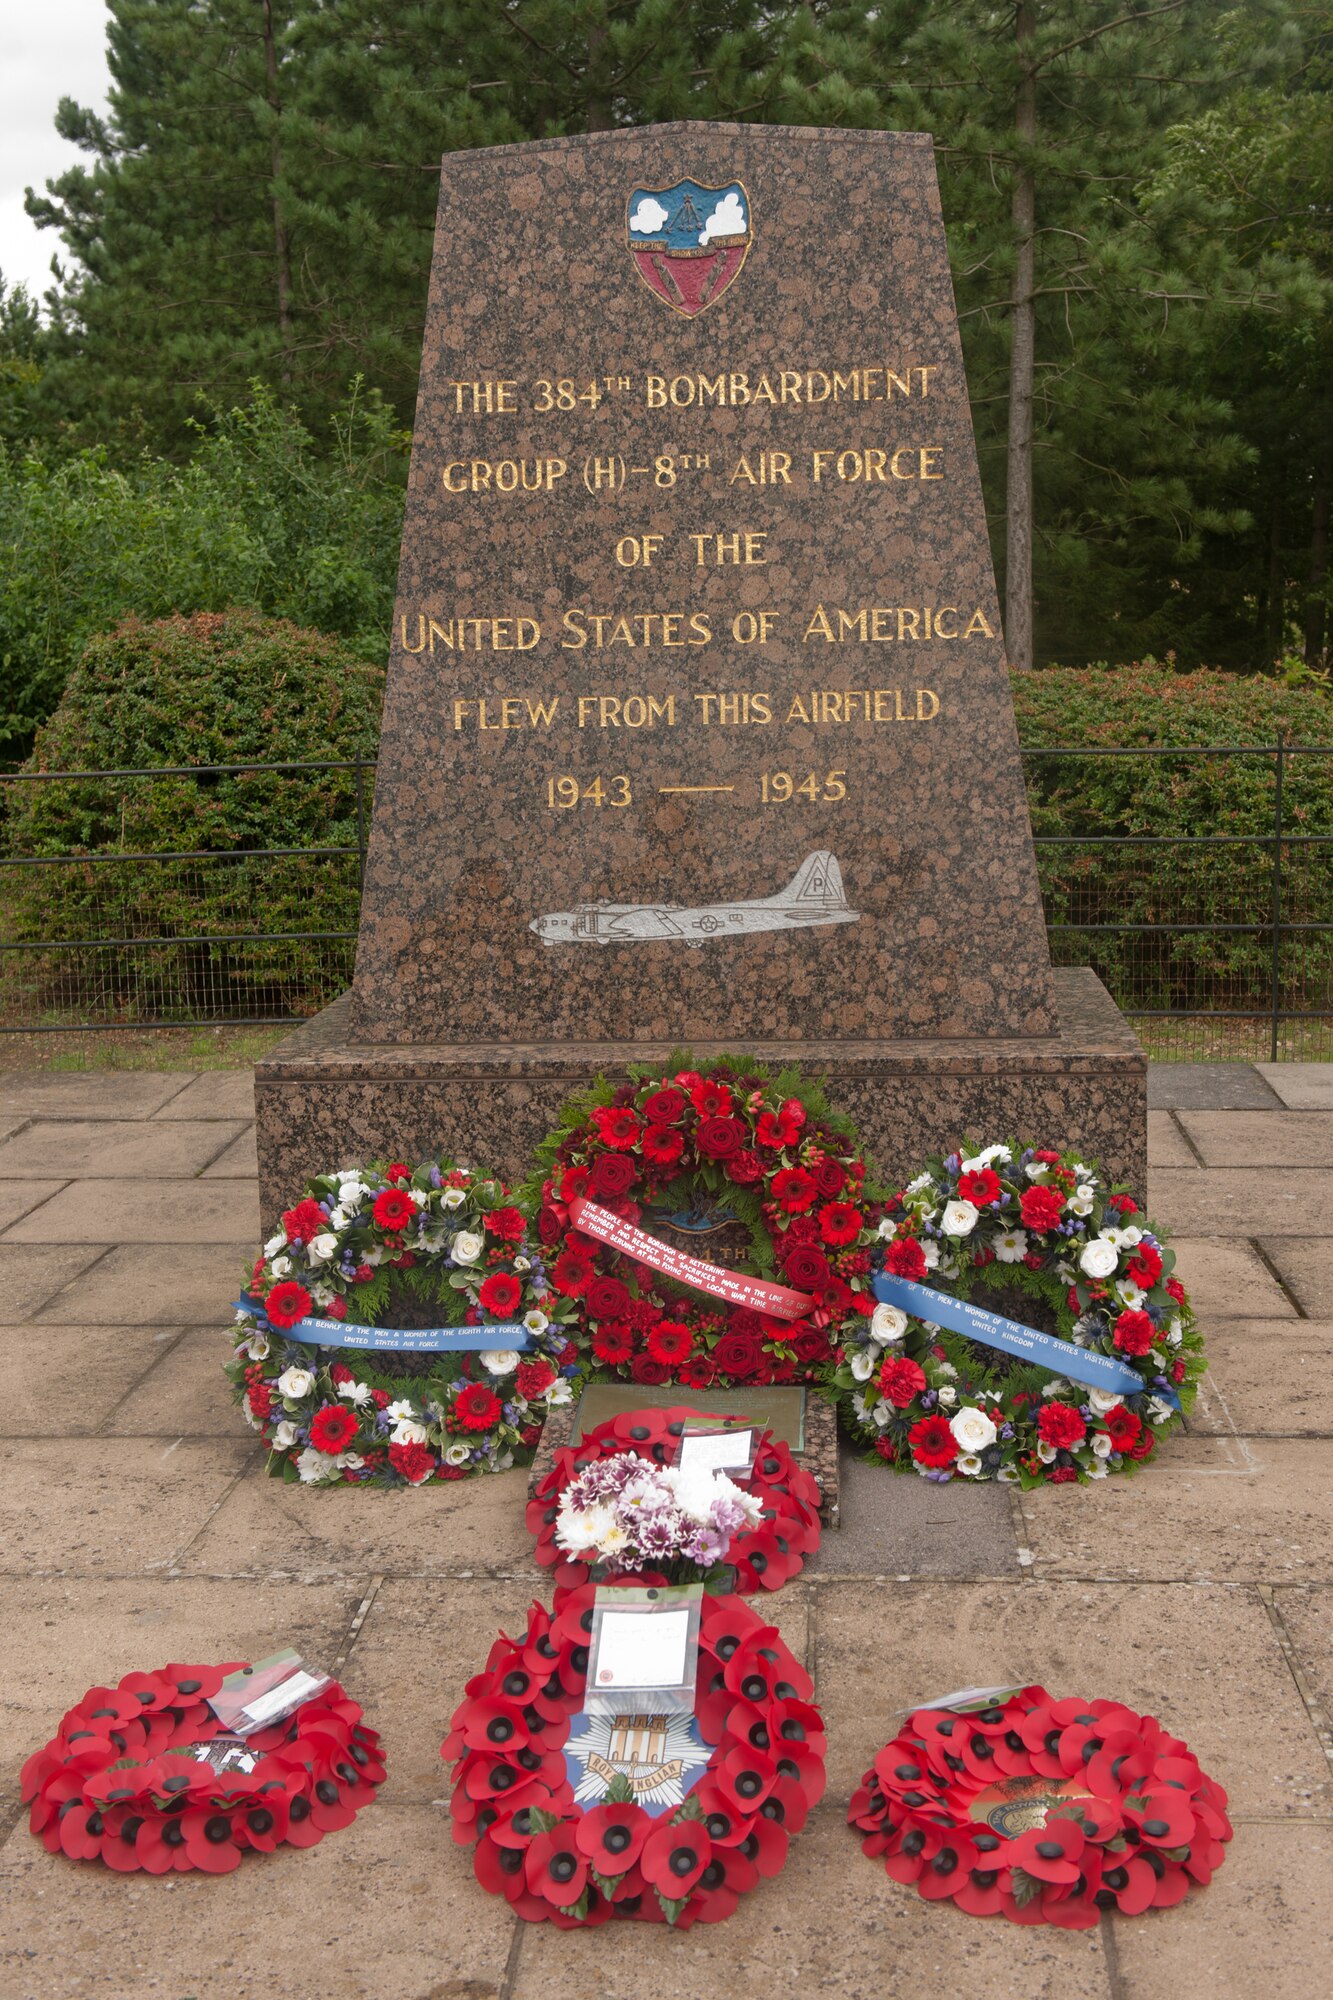 GRAFTON UNDERWOOD, United Kingdom – A memorial sits near Grafton Underwood Airfield. The memorial honors the Eighth Air Force Airmen stationed at Grafton Underwood during World War II. Maj. Gen. Stephen Wilson, Eighth Air Force commander, visited the memorial Aug. 17. The day marked the 70th anniversary of the first Eighth Air Force bombers, from the 97th Bombardment Group (Heavy), participating in World War II which launched from Grafton Underwood. Col. Frank Armstrong, 97th BG commander, and the 340th Bomb Squadron commander Maj. Paul Tibbets (who later flew the Enola Gay to Hiroshima, Japan, on the first atomic bomb mission) piloted the lead aircraft of the group, Butcher Shop. In the leading aircraft of the second flight, Yankee Doodle, flew Gen. Ira C. Eaker, the commanding general of the VIII Bomber Command. (U.S. Air Force photo by Staff Sgt. Brian Stives)